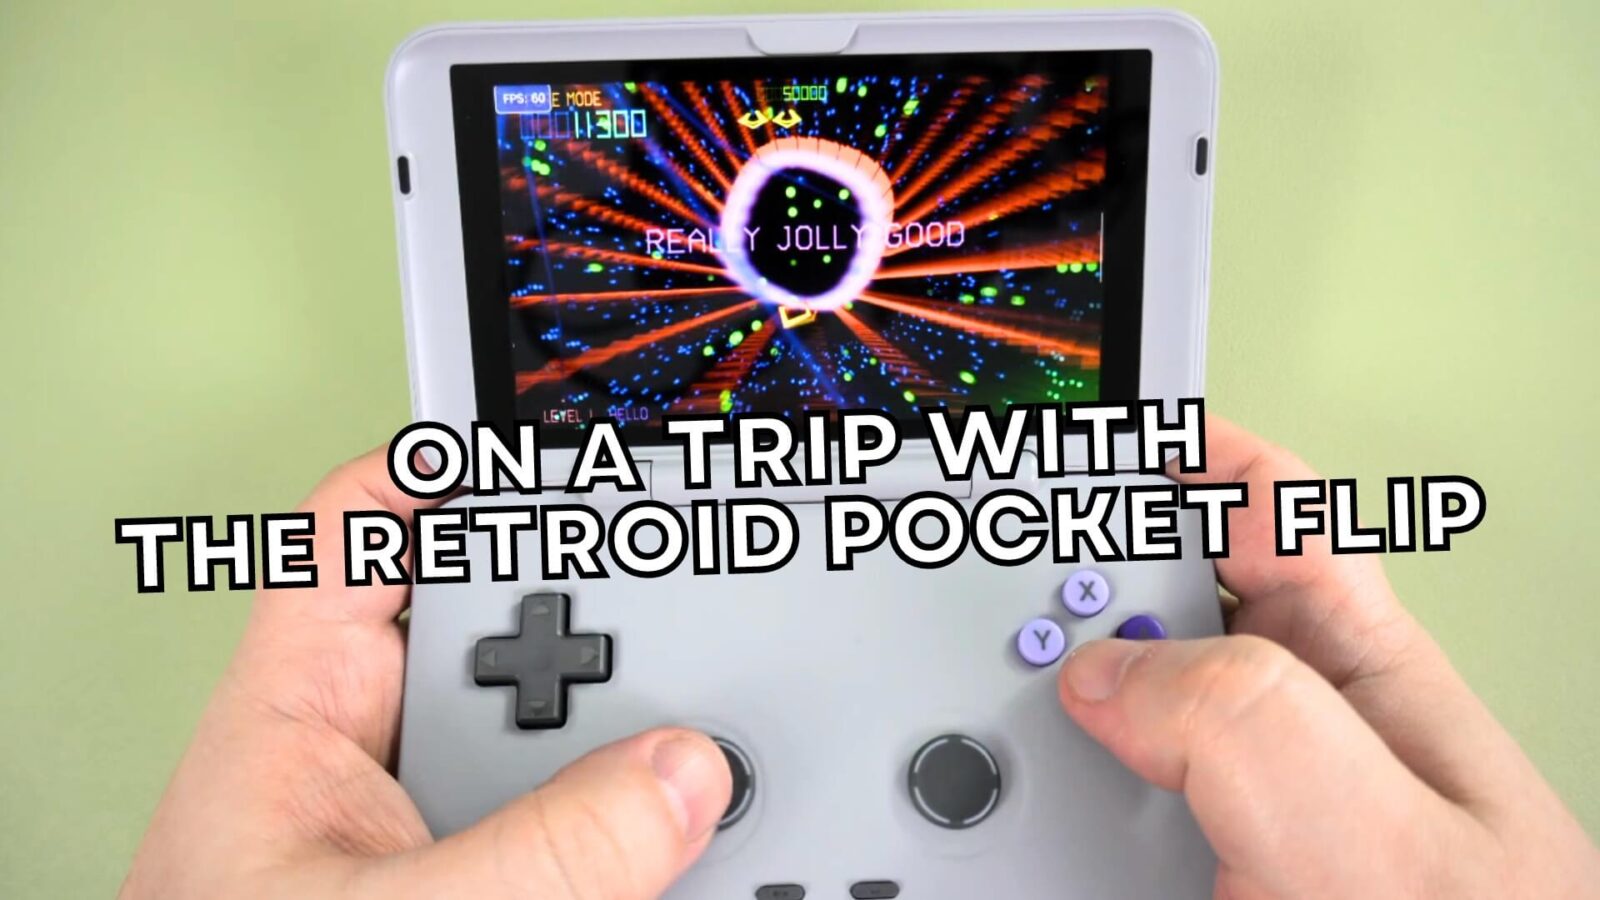 Retroid Pocket Flip Review - Awesome Android 11 clamshell retro gaming  handheld! - DroiX Blogs